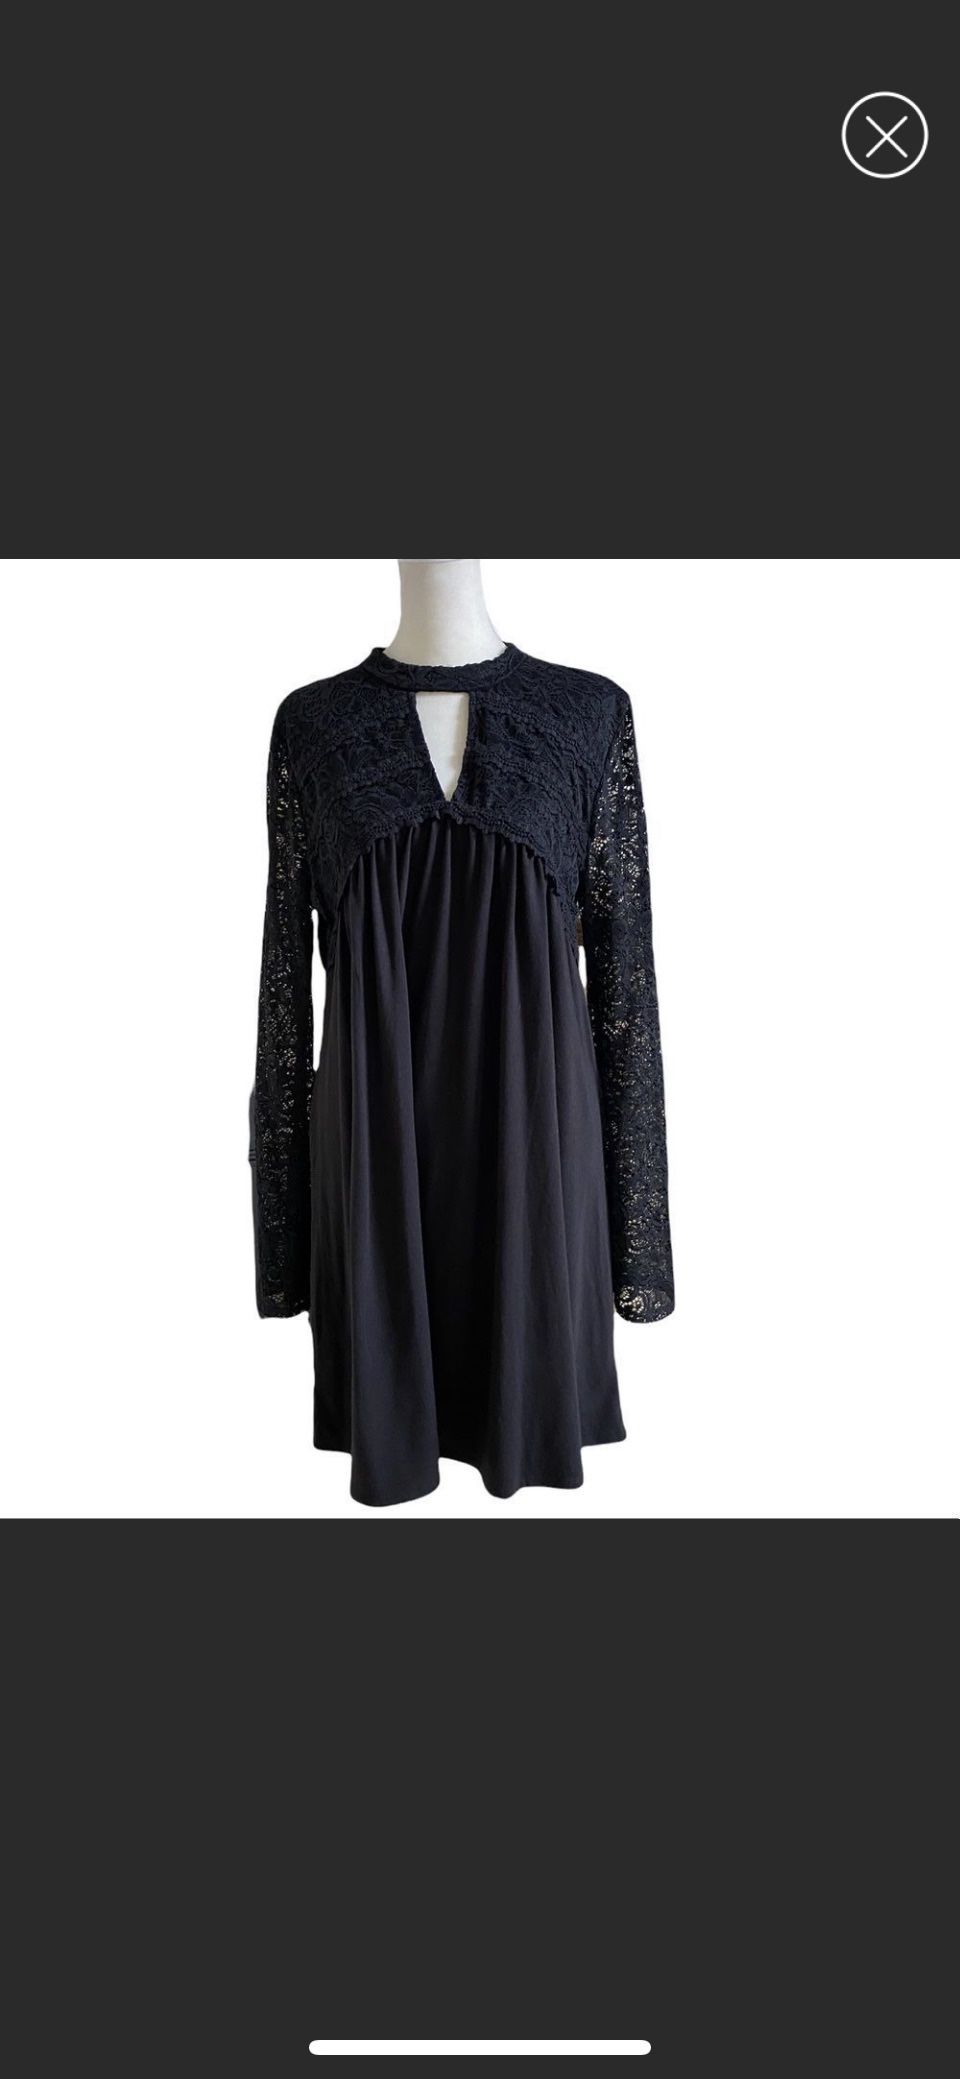 Janet Chung Lace Bell Sleeves Keyhole Empire Waist Swing Dress Large